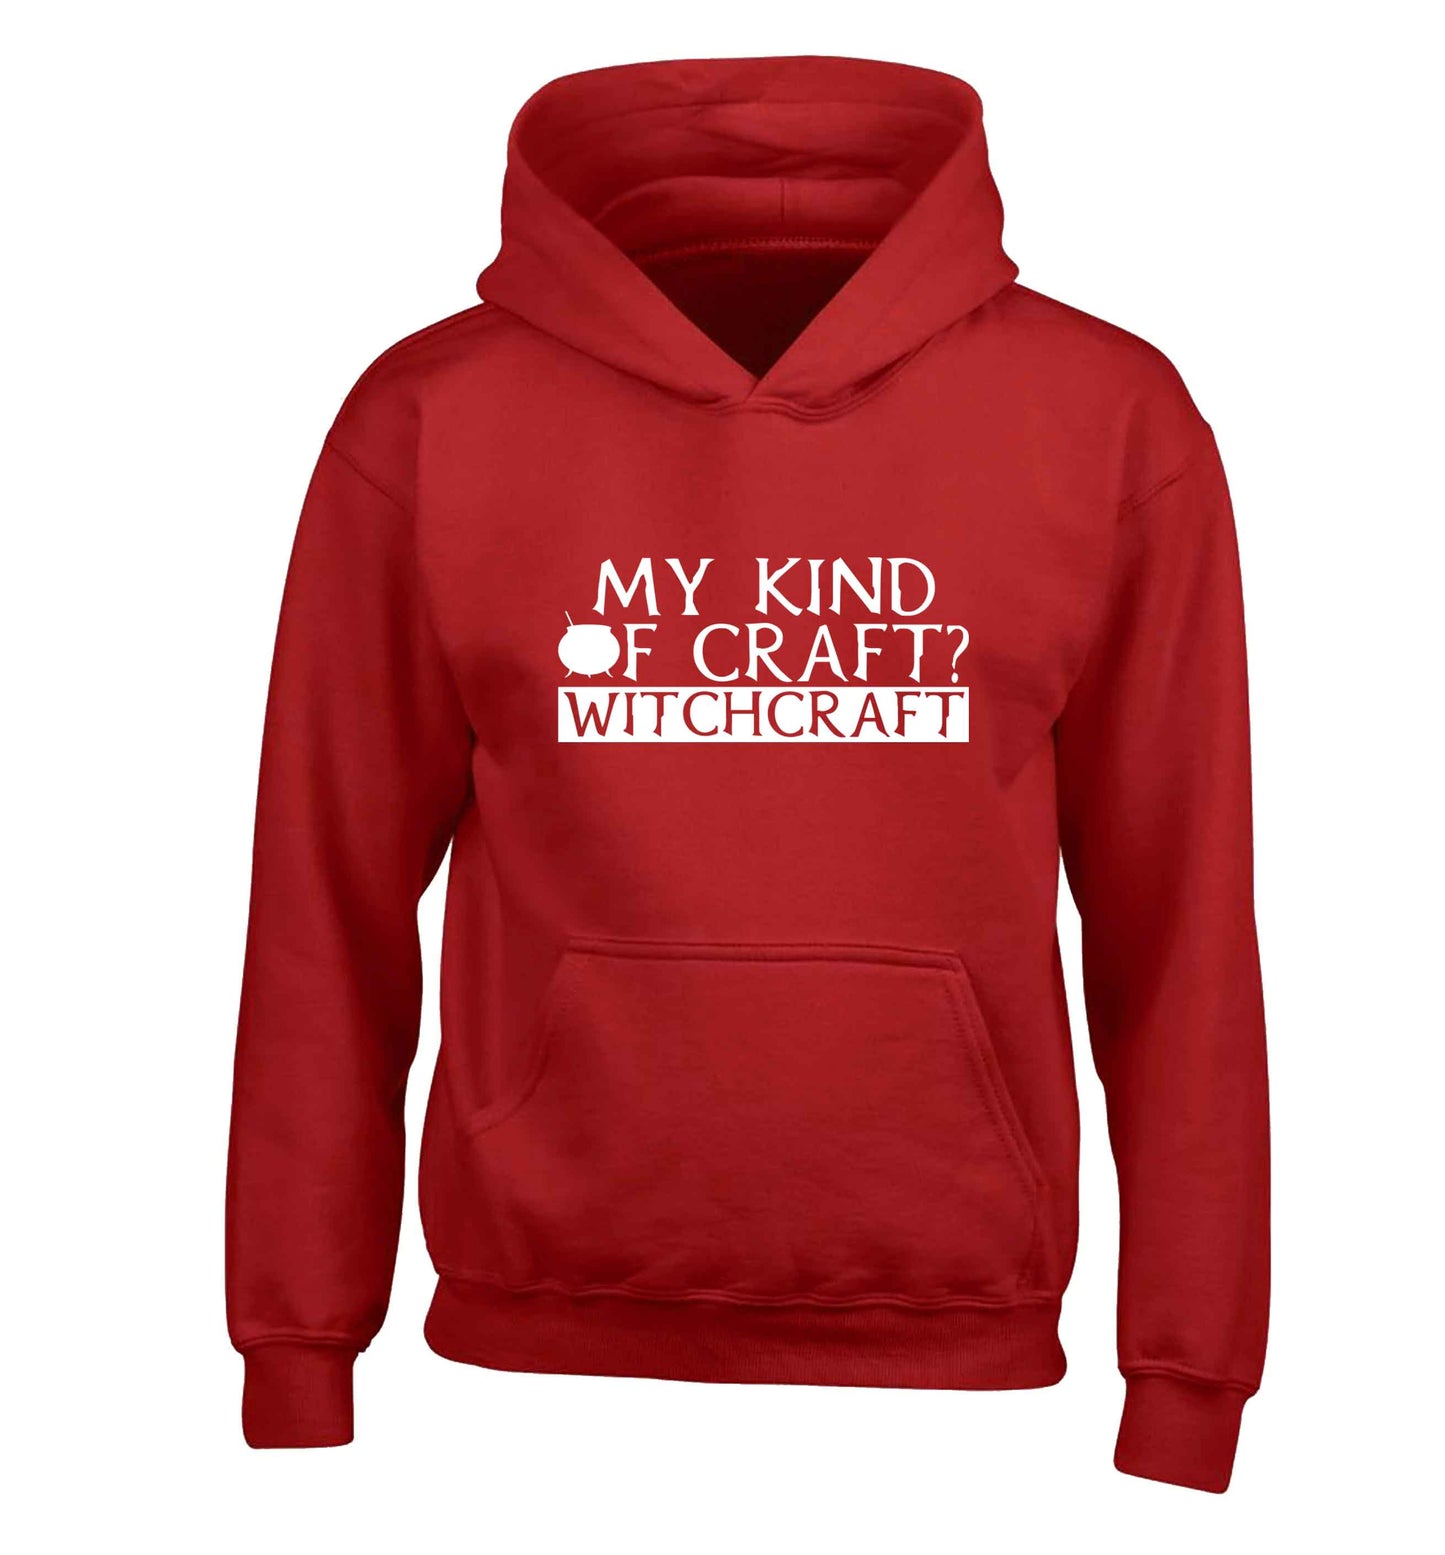 My king of craft? witchcraft  children's red hoodie 12-13 Years